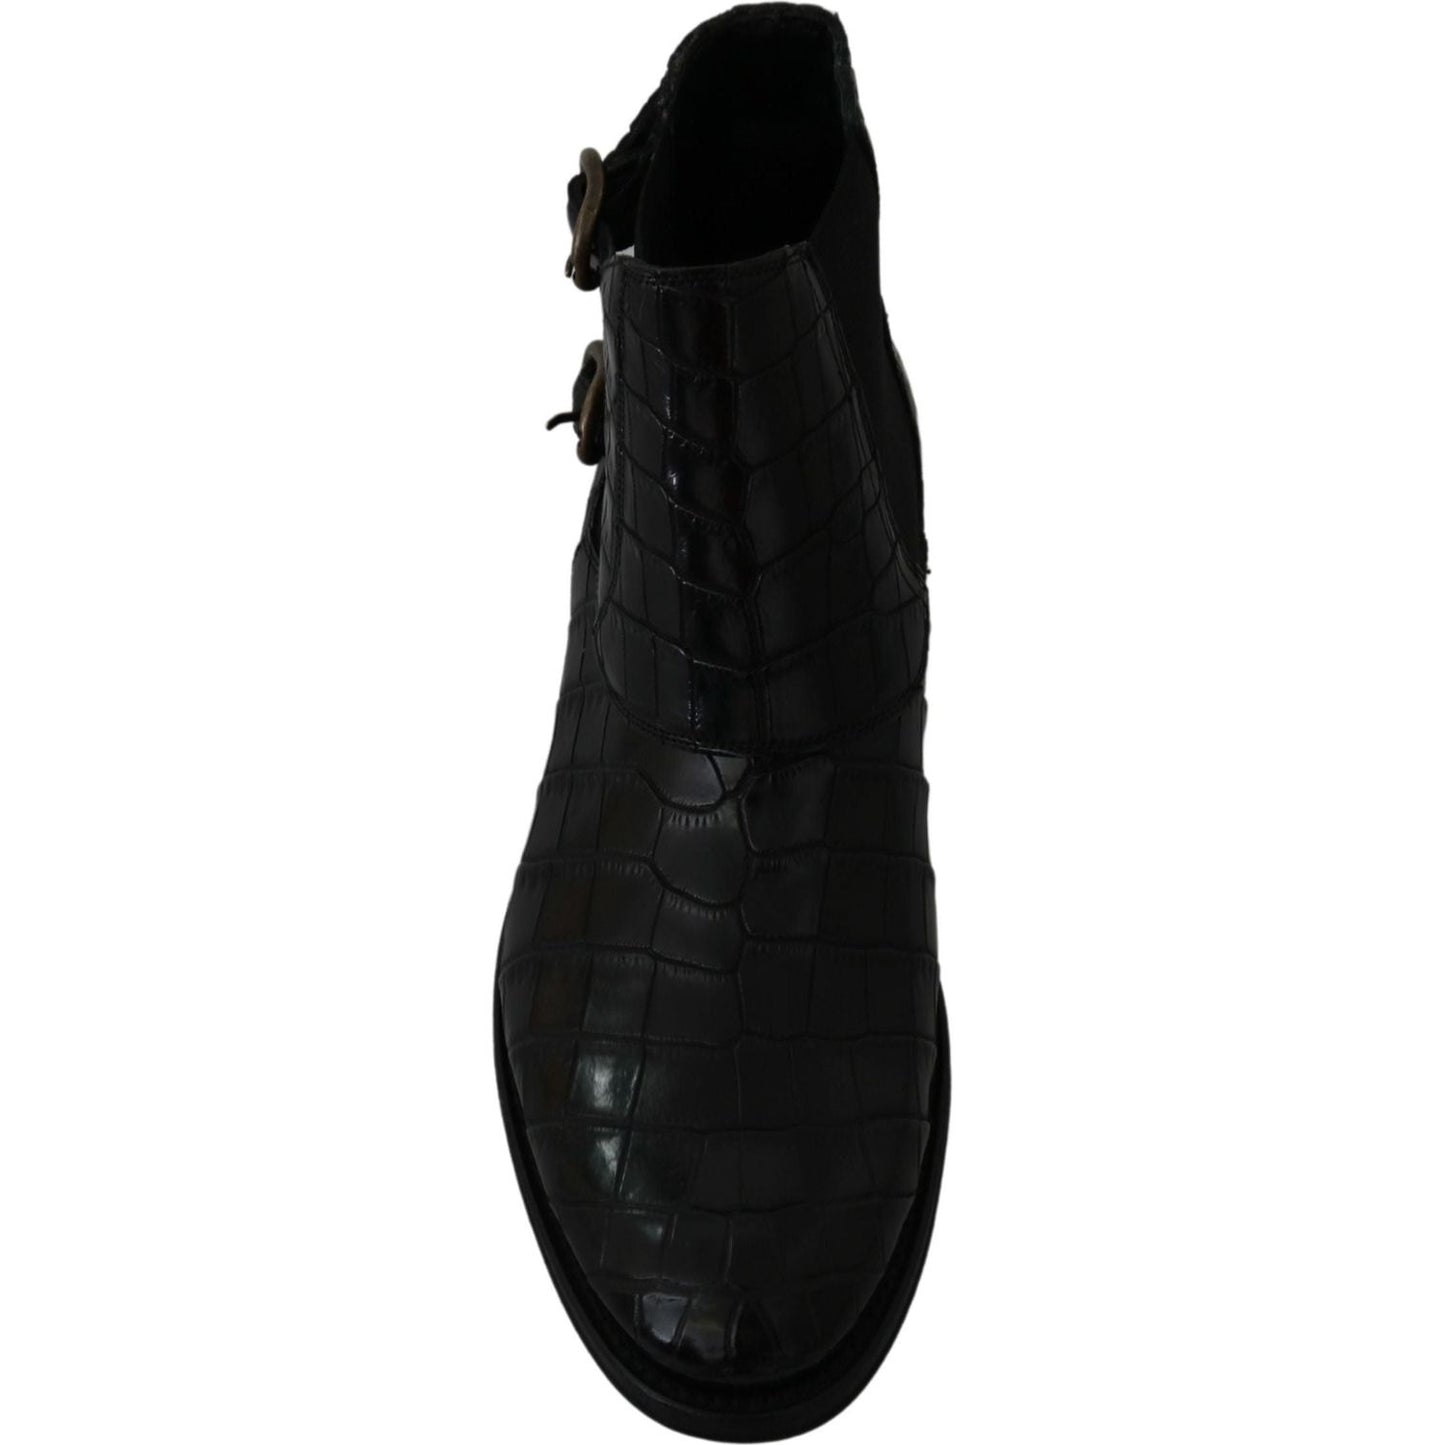 Dolce & Gabbana Elegant Derby Brogue Boots in Exotic Leather black-crocodile-leather-derby-boots-shoes